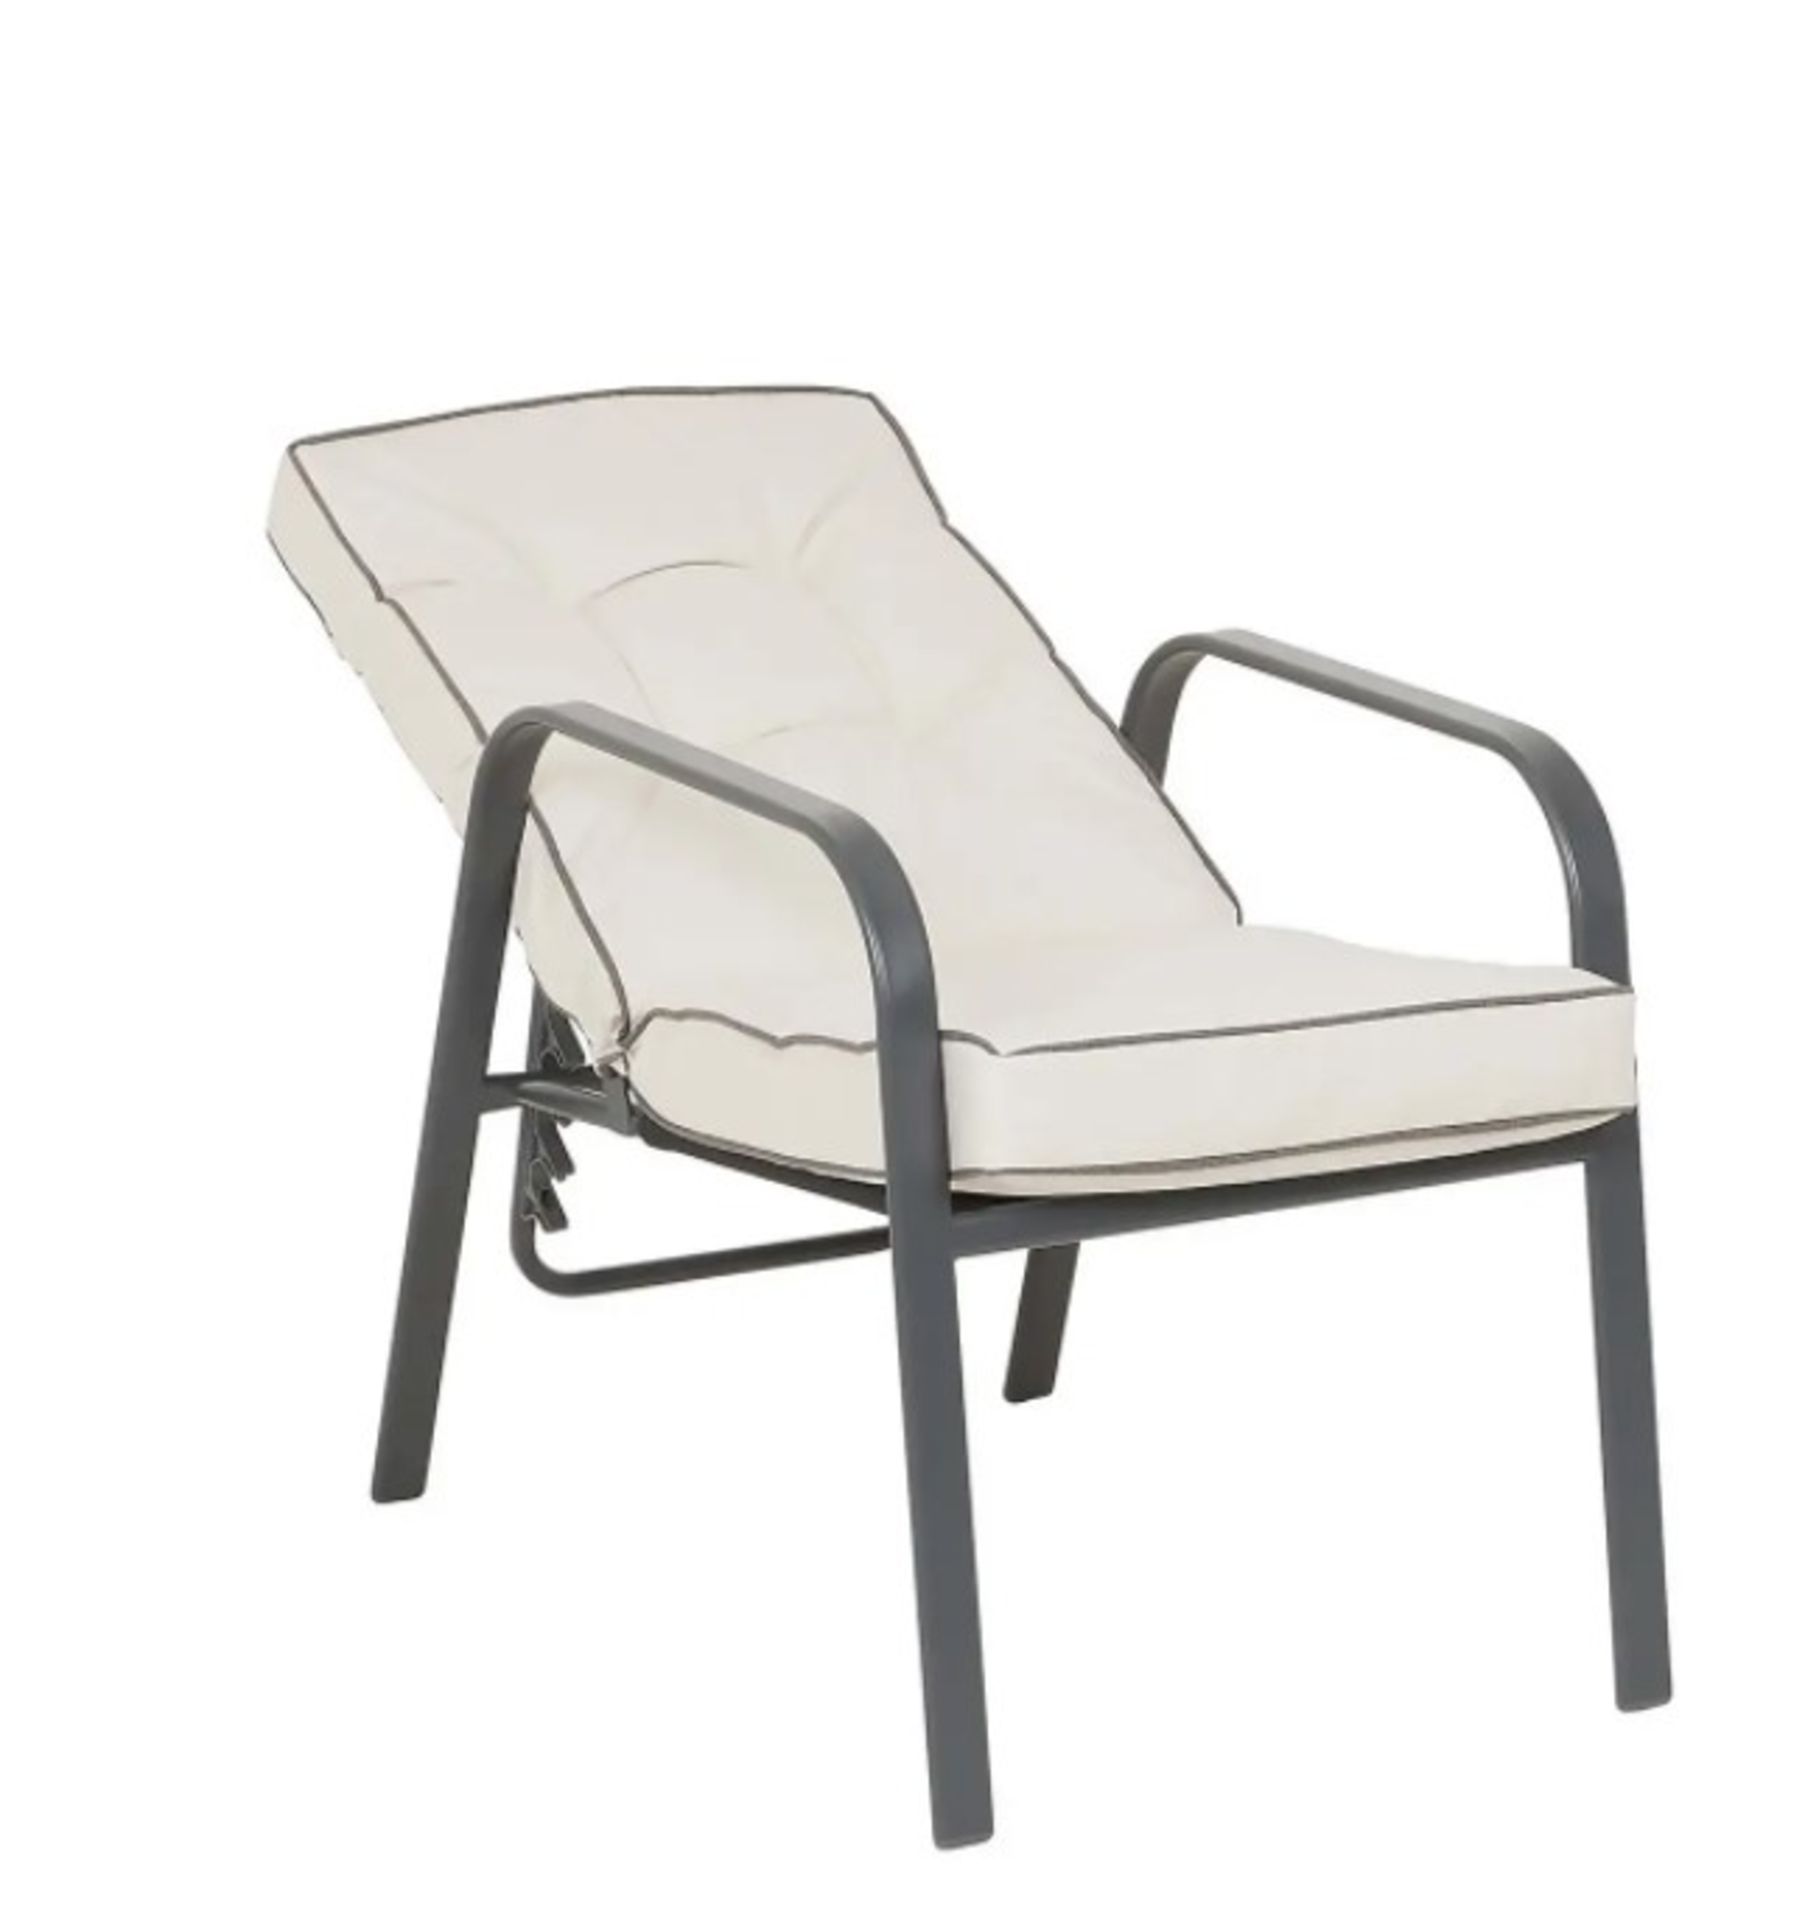 (7J) 3x Rowly Reclining Garden Chair With 3x Cushion. (All Units Are In Used Condition). - Image 2 of 4